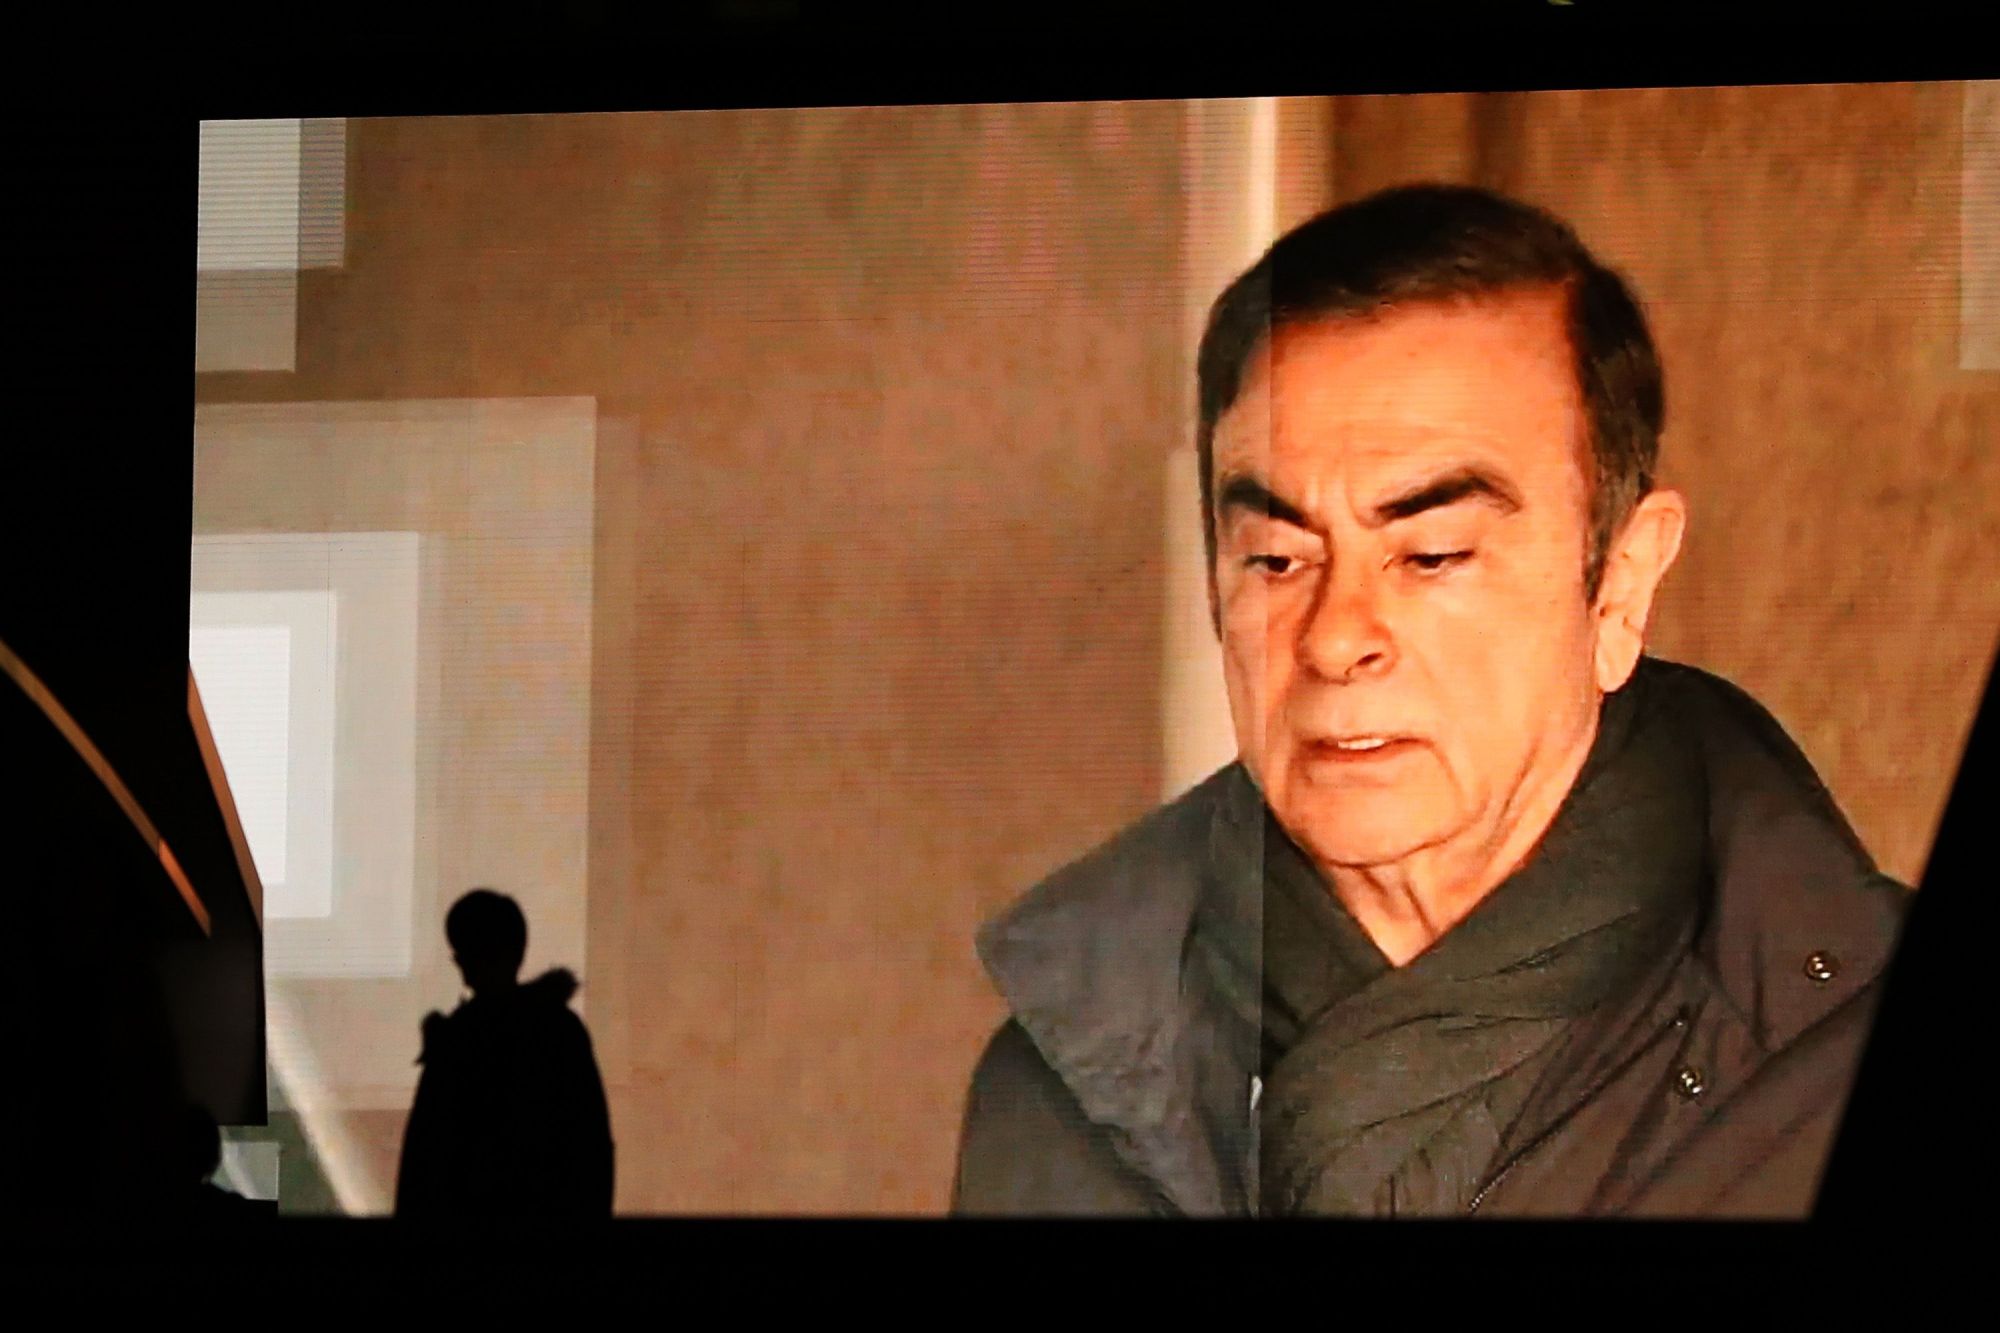 Pedestrians walk past a big TV monitor in Tokyo in April as Carlos Ghosn's image appears on a news program. Ghosn's stunning escape from Japan is bound to have an impact on future foreign suspects who seek to post bail, experts say. | PHOTOGRAPHER: TAKASHI AOYAMA/GETTY IMAGES